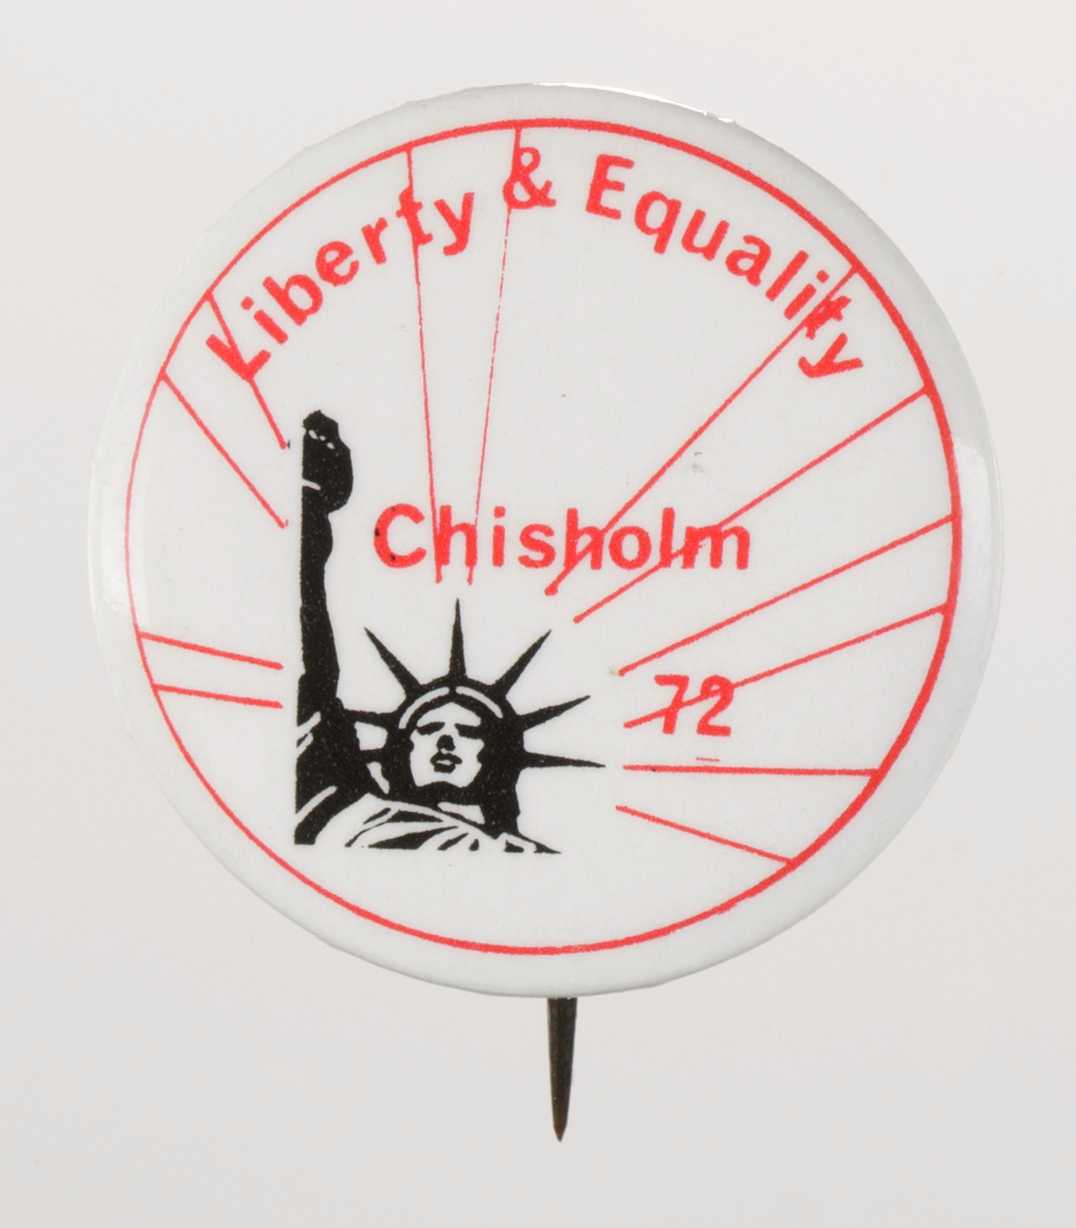 A circular metal pin-back button. The button has a white background with red type that reads: [Liberty & Equality] around the top edge of the button, and [Chisholm / 72] in the center. The bottom of the button has a depiction of the bust of the Statue of Liberty (in black), with red lines coming out from it and going to the edges of the button. The edge of the button has [Bristow Box 1741 Santa Cruz CA 9504] written on it in red type. The edge of the button also has a red logo. The back of the button is silver in color, but has some rust marks. The pin does not have a clasp.